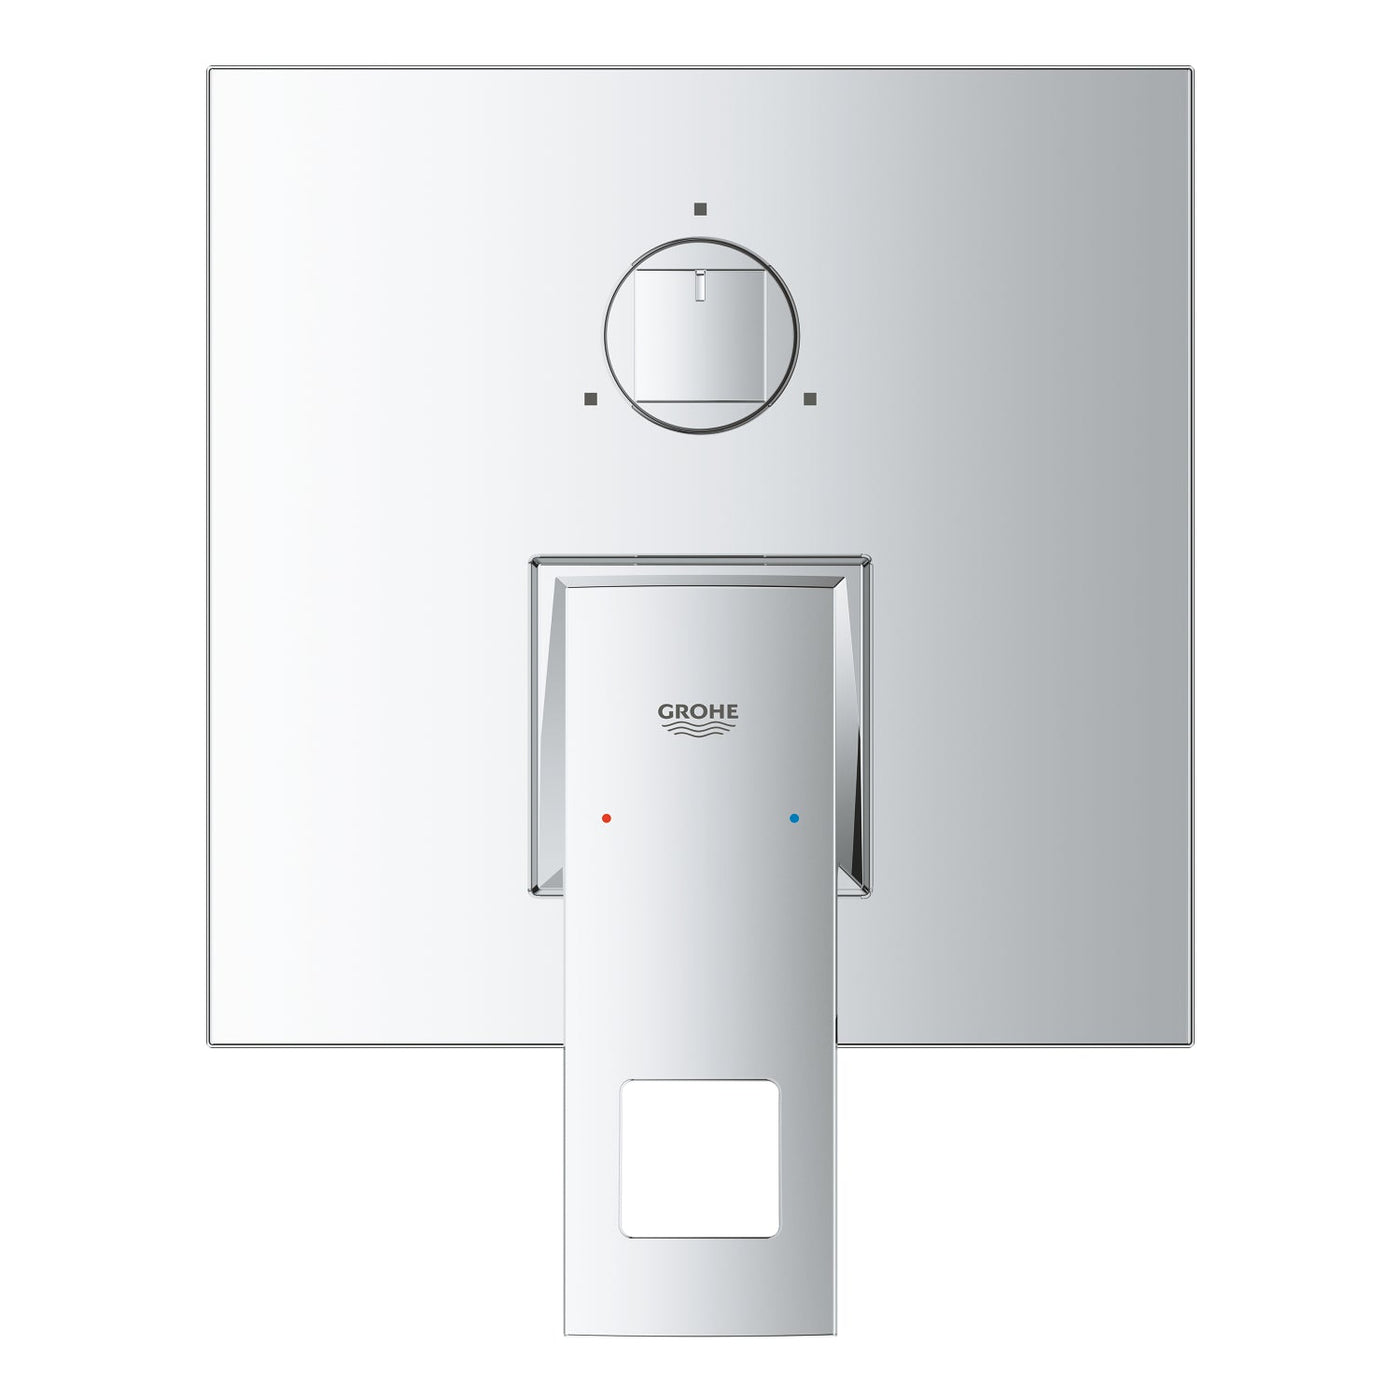 Grohe Chrome Eurocube Single-lever mixer with 3-way diverter - Letta London - Thermostatic Showers